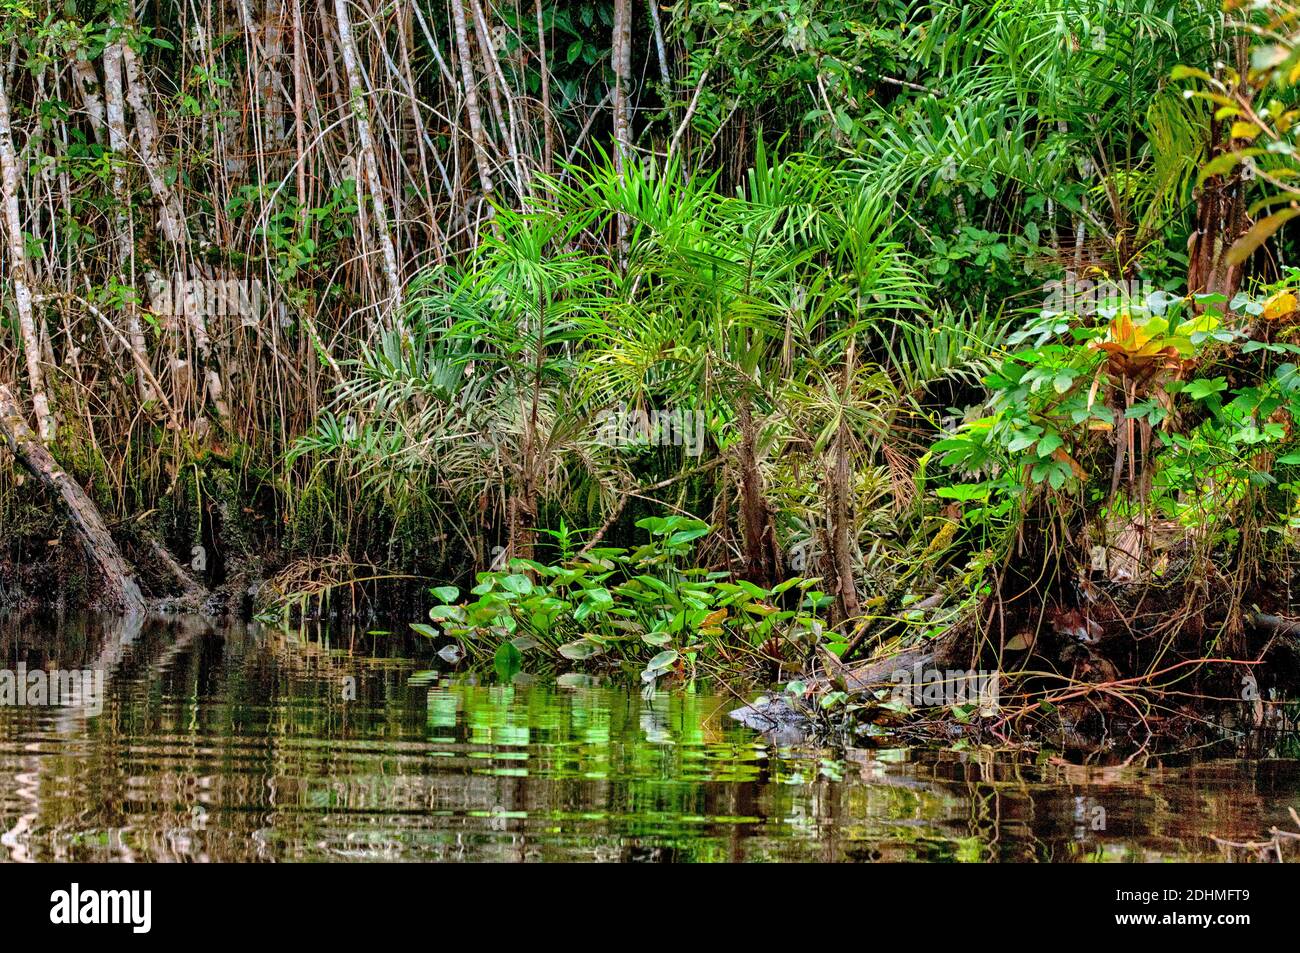 Water plants and other vegetation along the rim of a small river in the rainforest of eastern Ecuador. Stock Photo